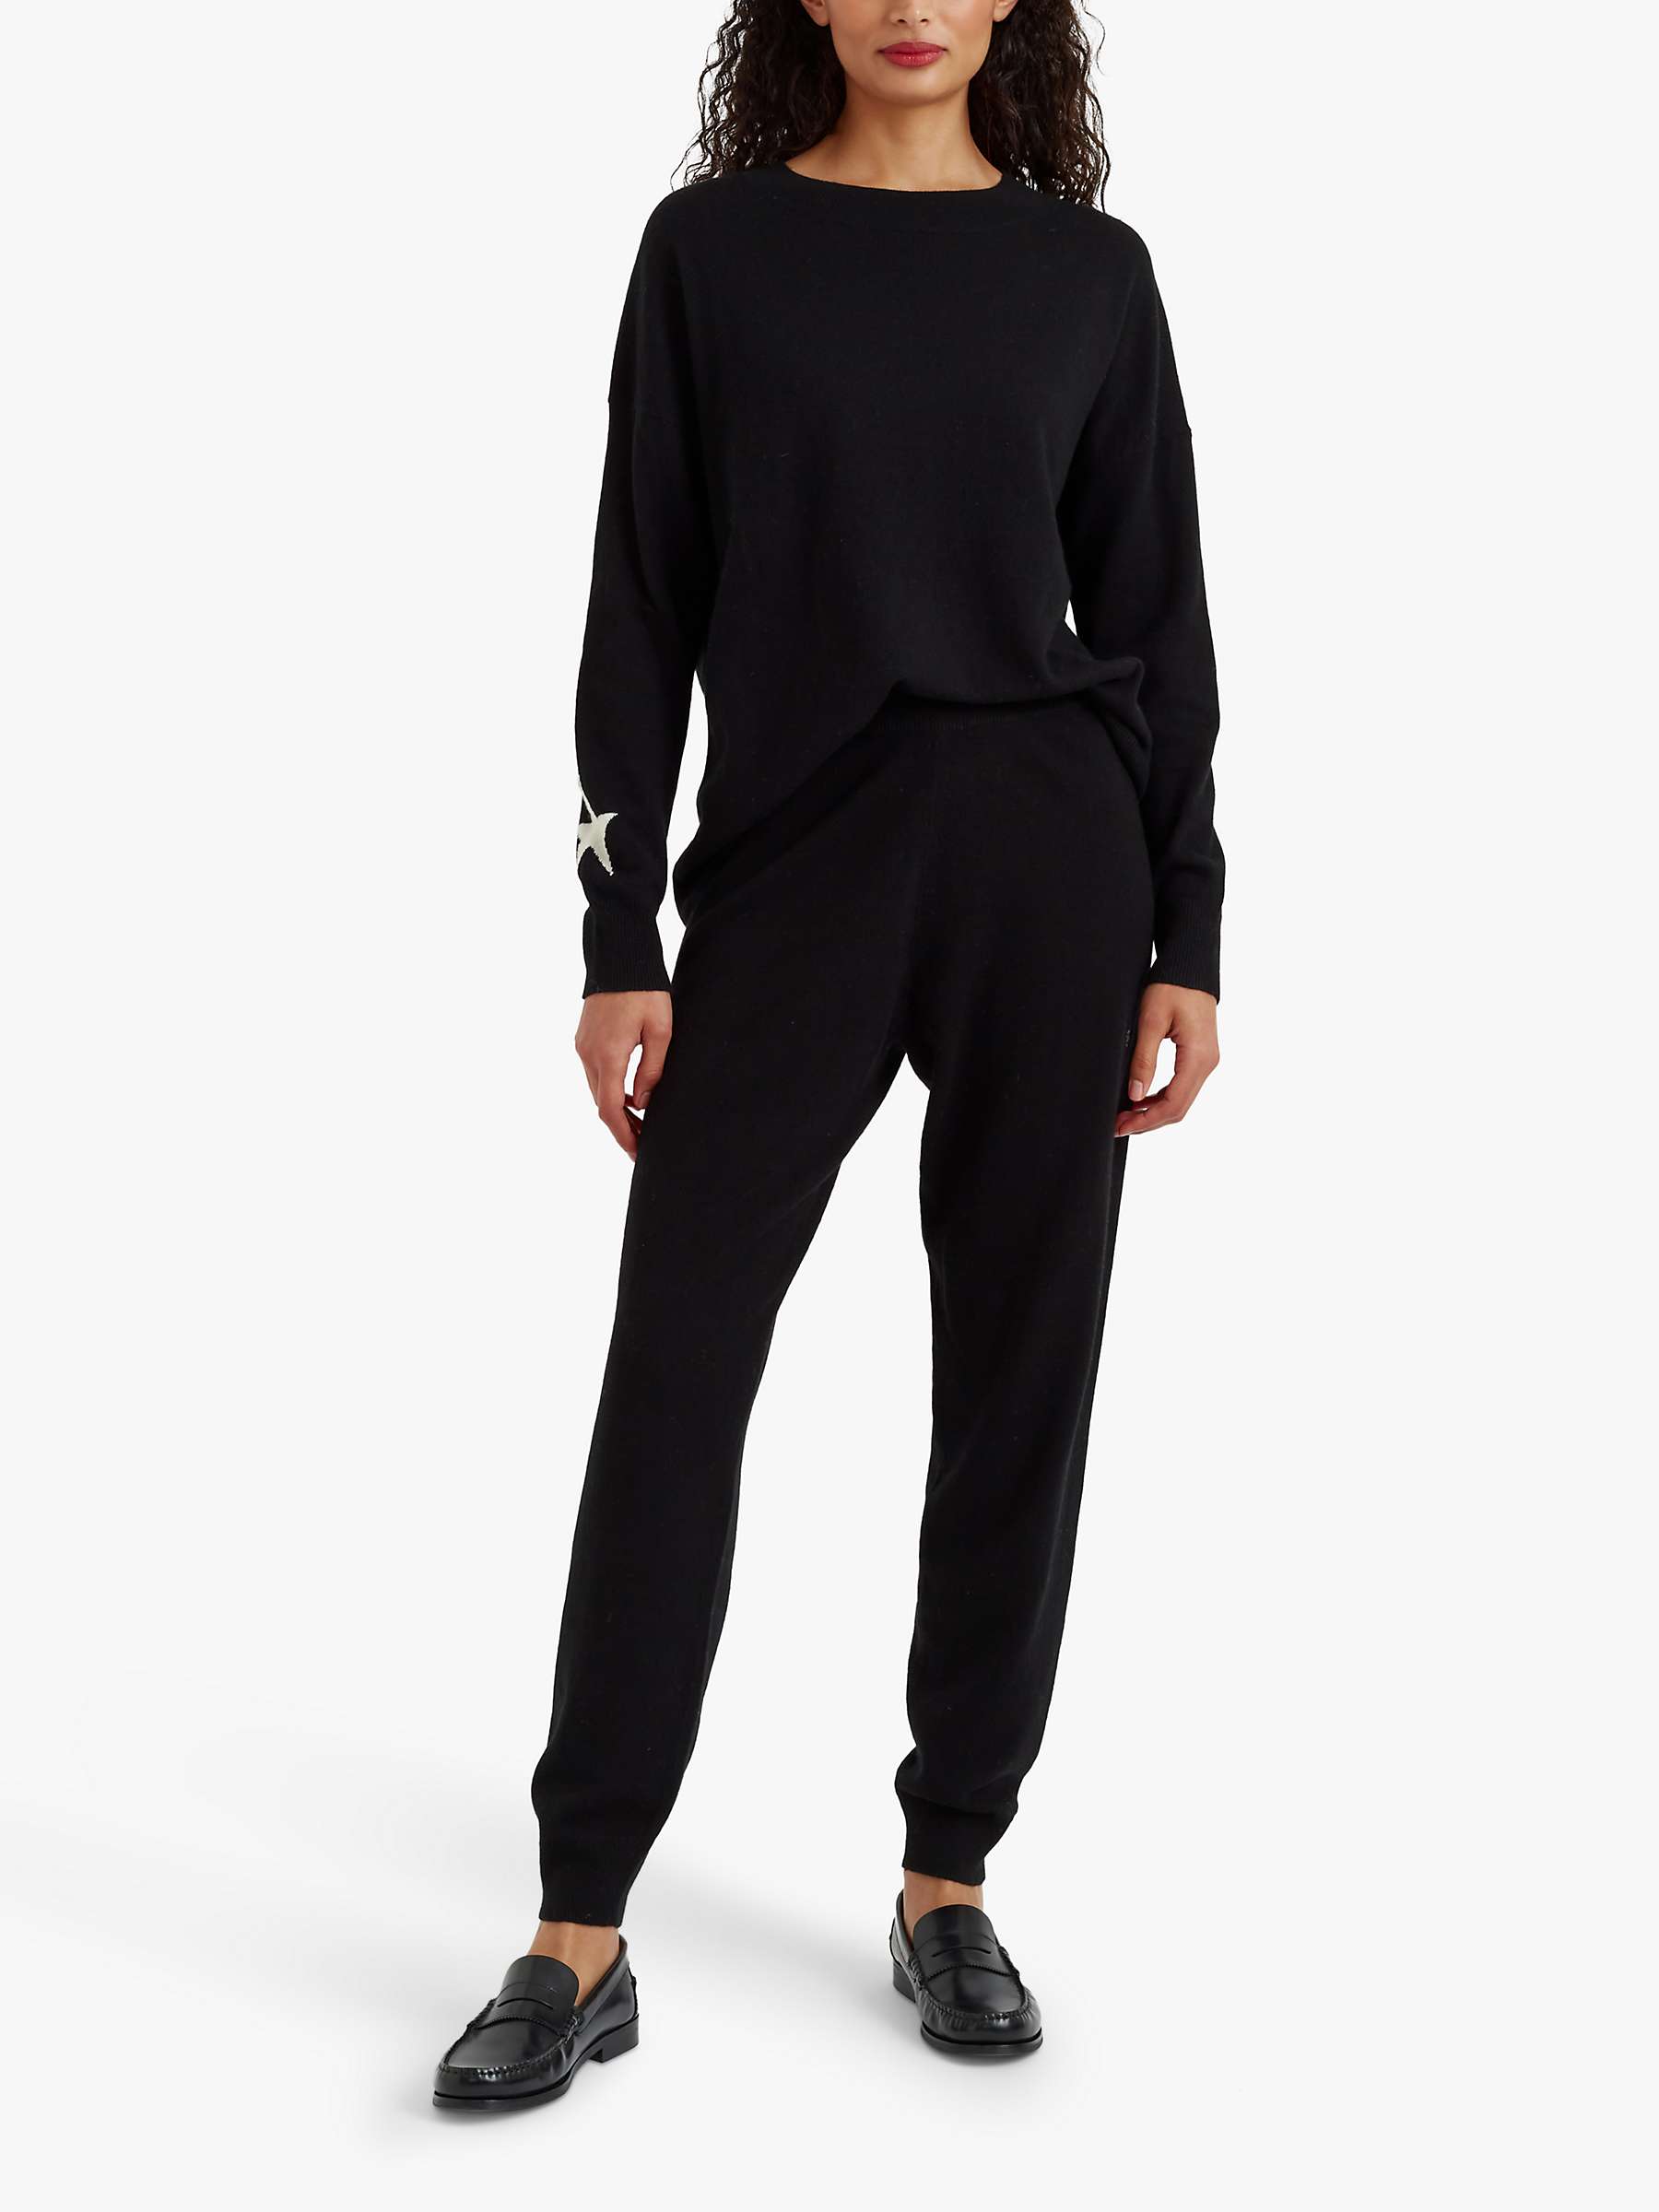 Buy Chinti & Parker Wool and Cashmere Blend Star Track Joggers, Black Online at johnlewis.com